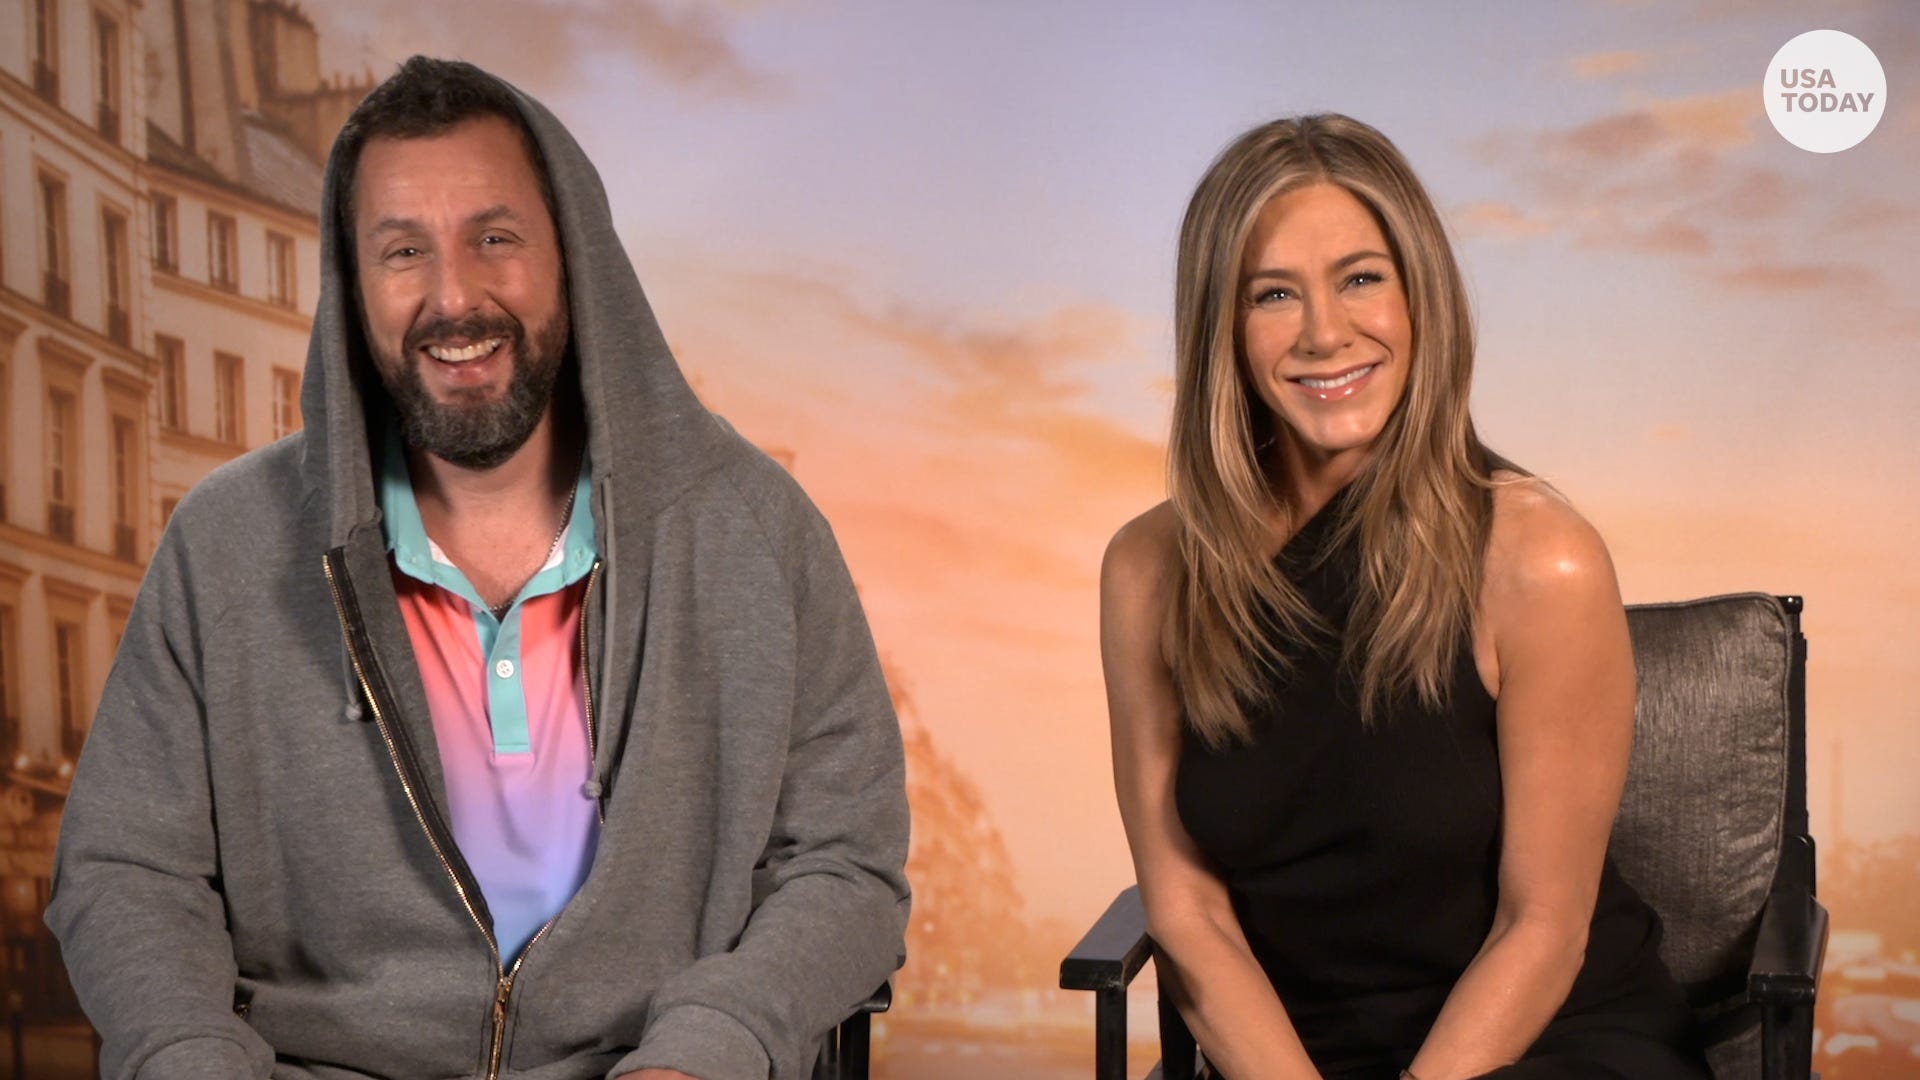 Watch Jennifer Aniston walk out on Adam Sandler while promoting 'Murder Mystery 2'